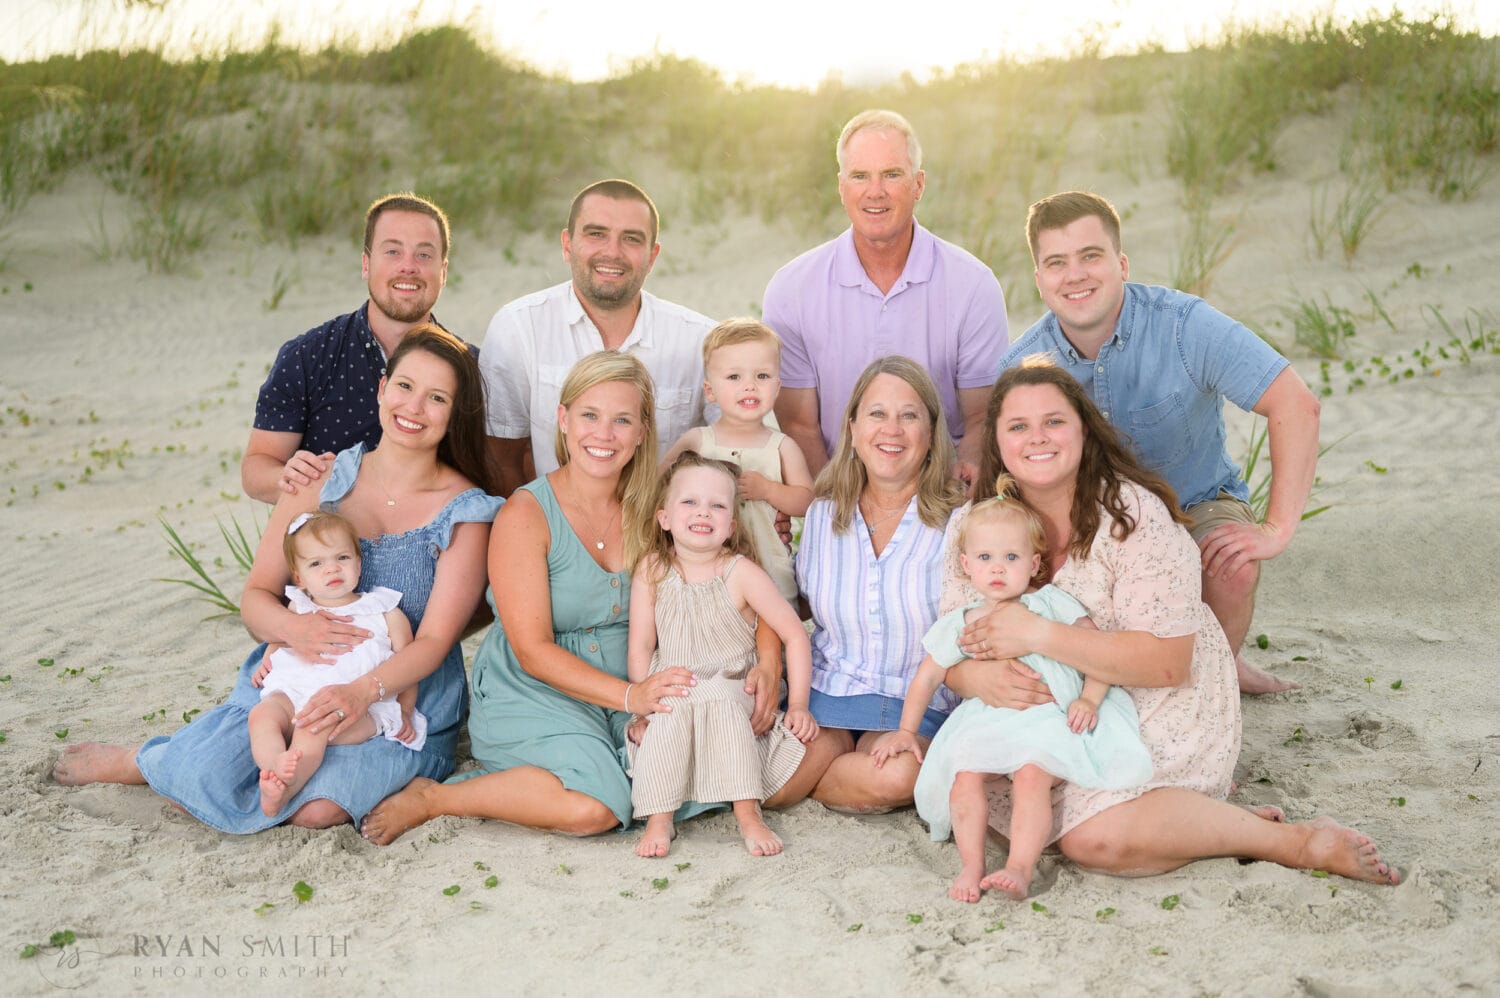 Big family with lots of kids on a windy day - Pawleys Island